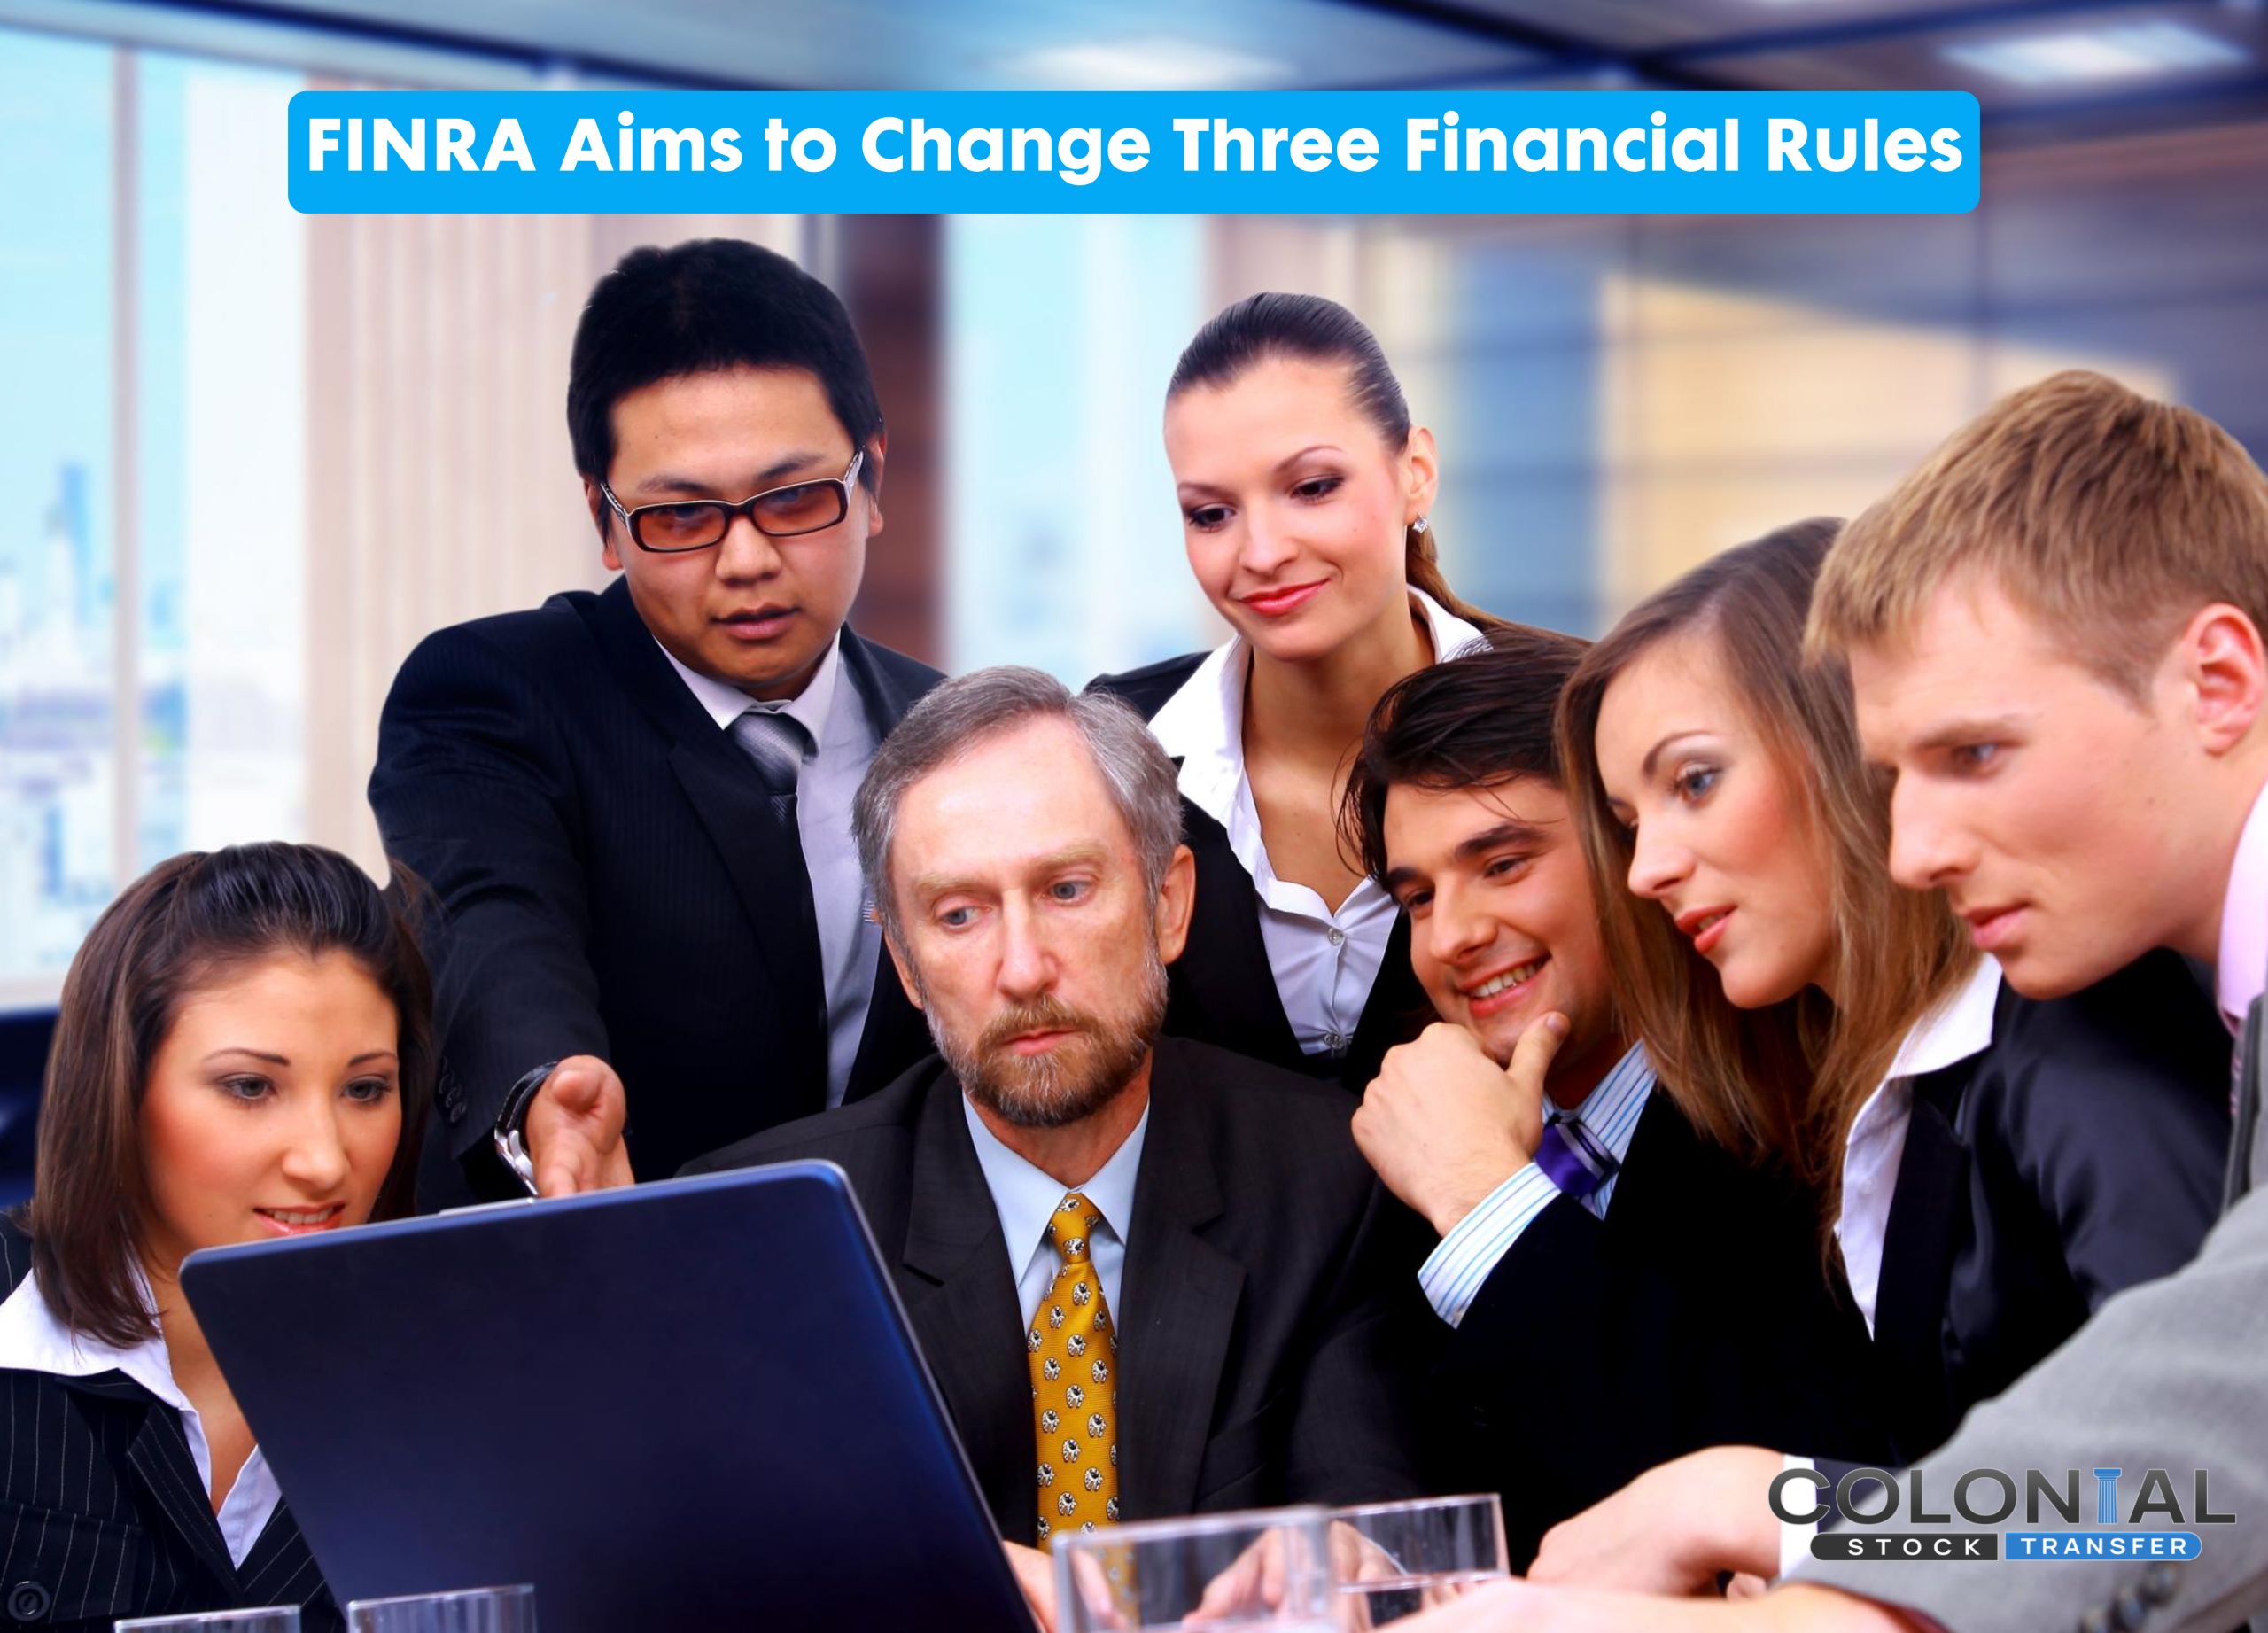 FINRA Aims to Change Three Financial Rules